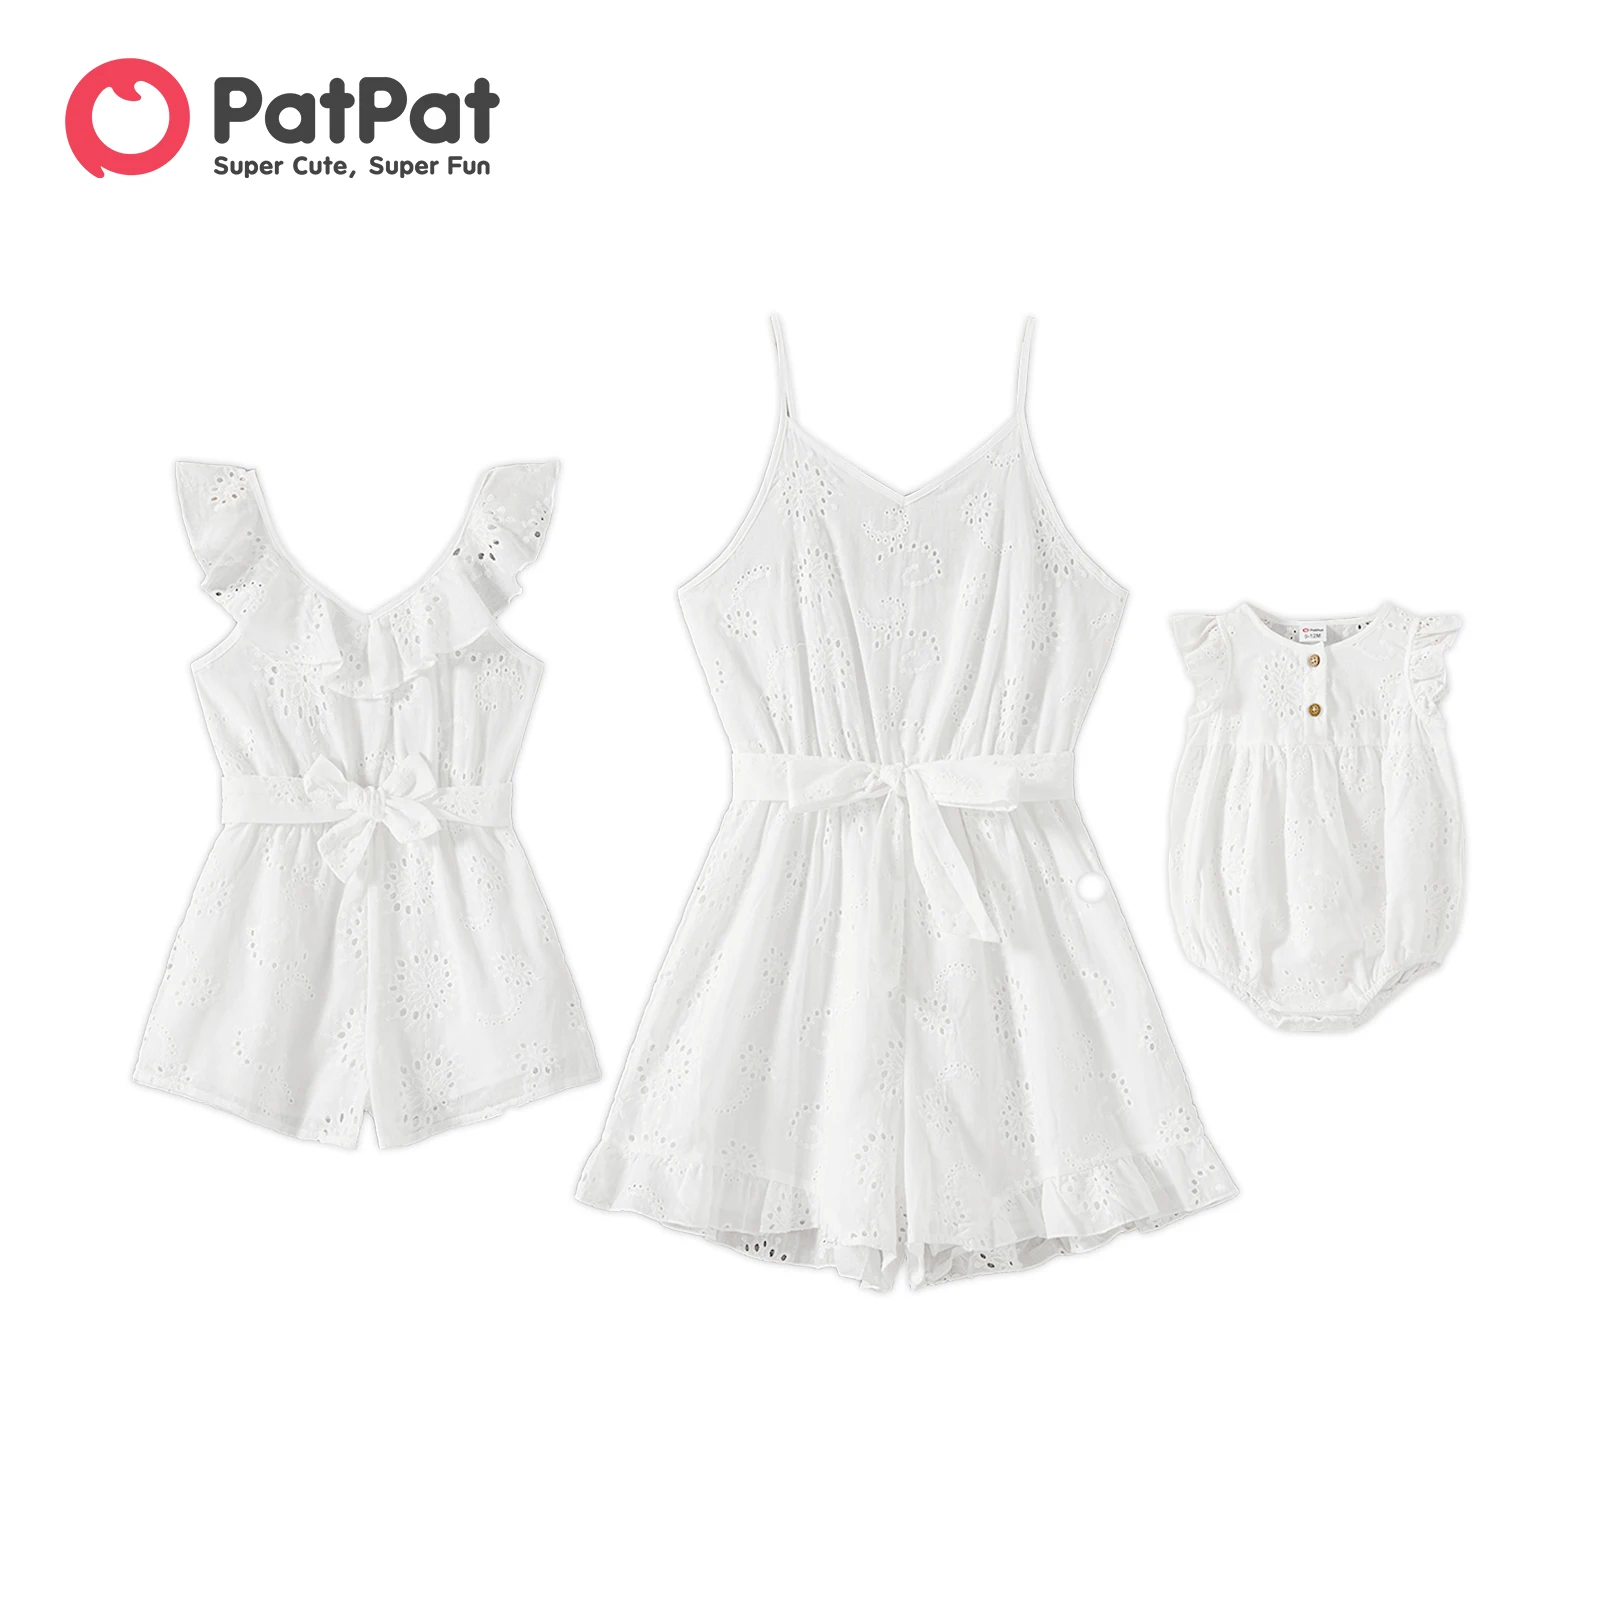 

PatPat Mommy and Me 100% Cotton White Ruffle Trim Sleeveless Belted Rompers